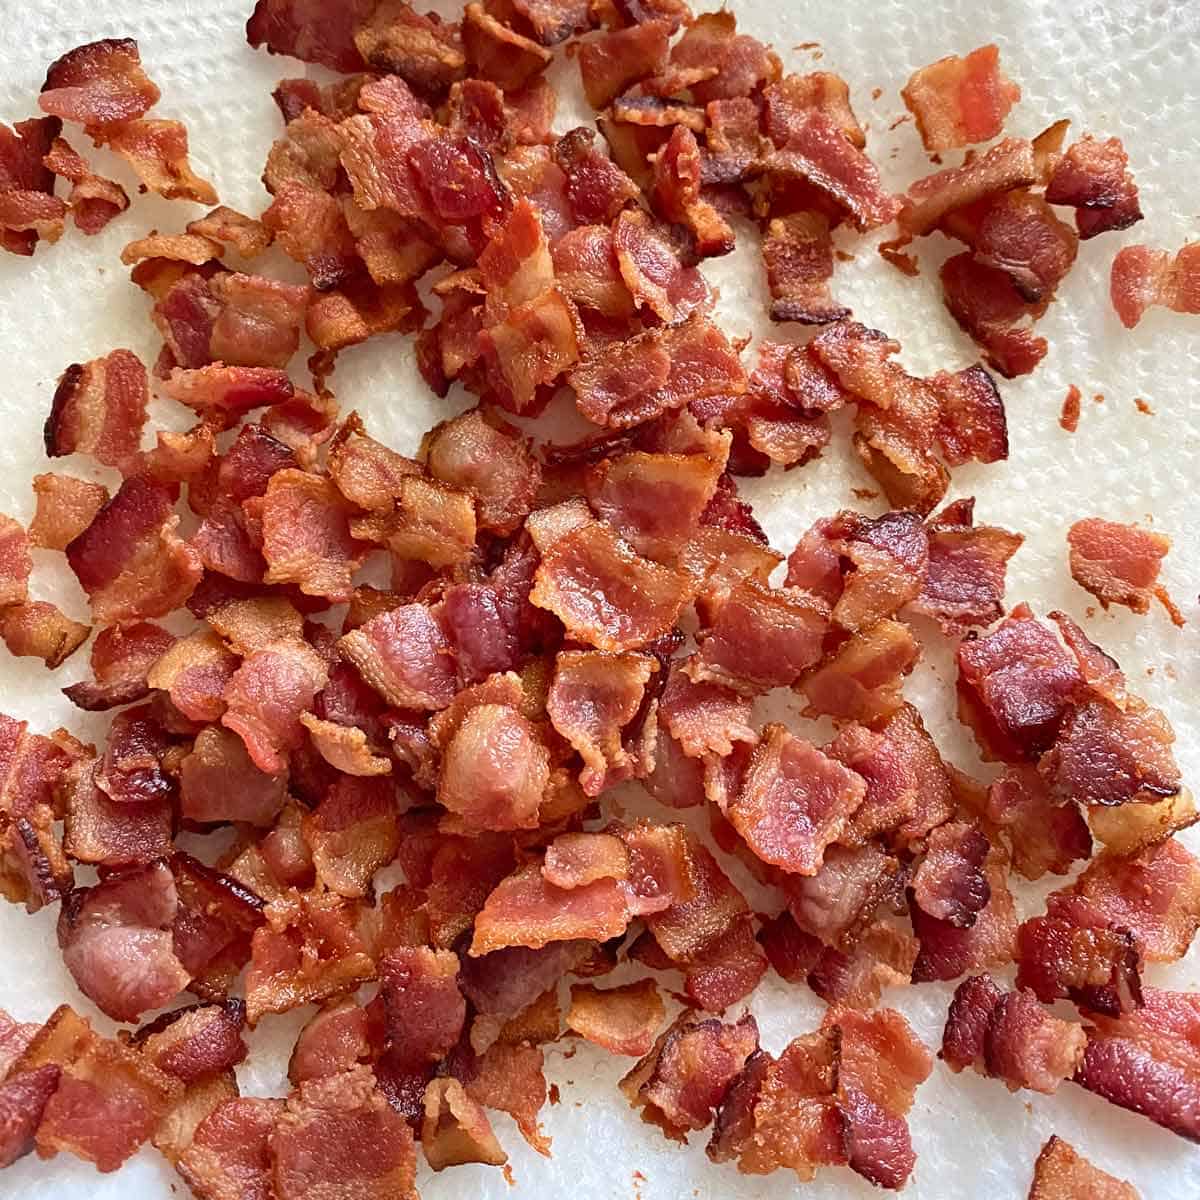 Homemade bacon bits on a white paper towel.